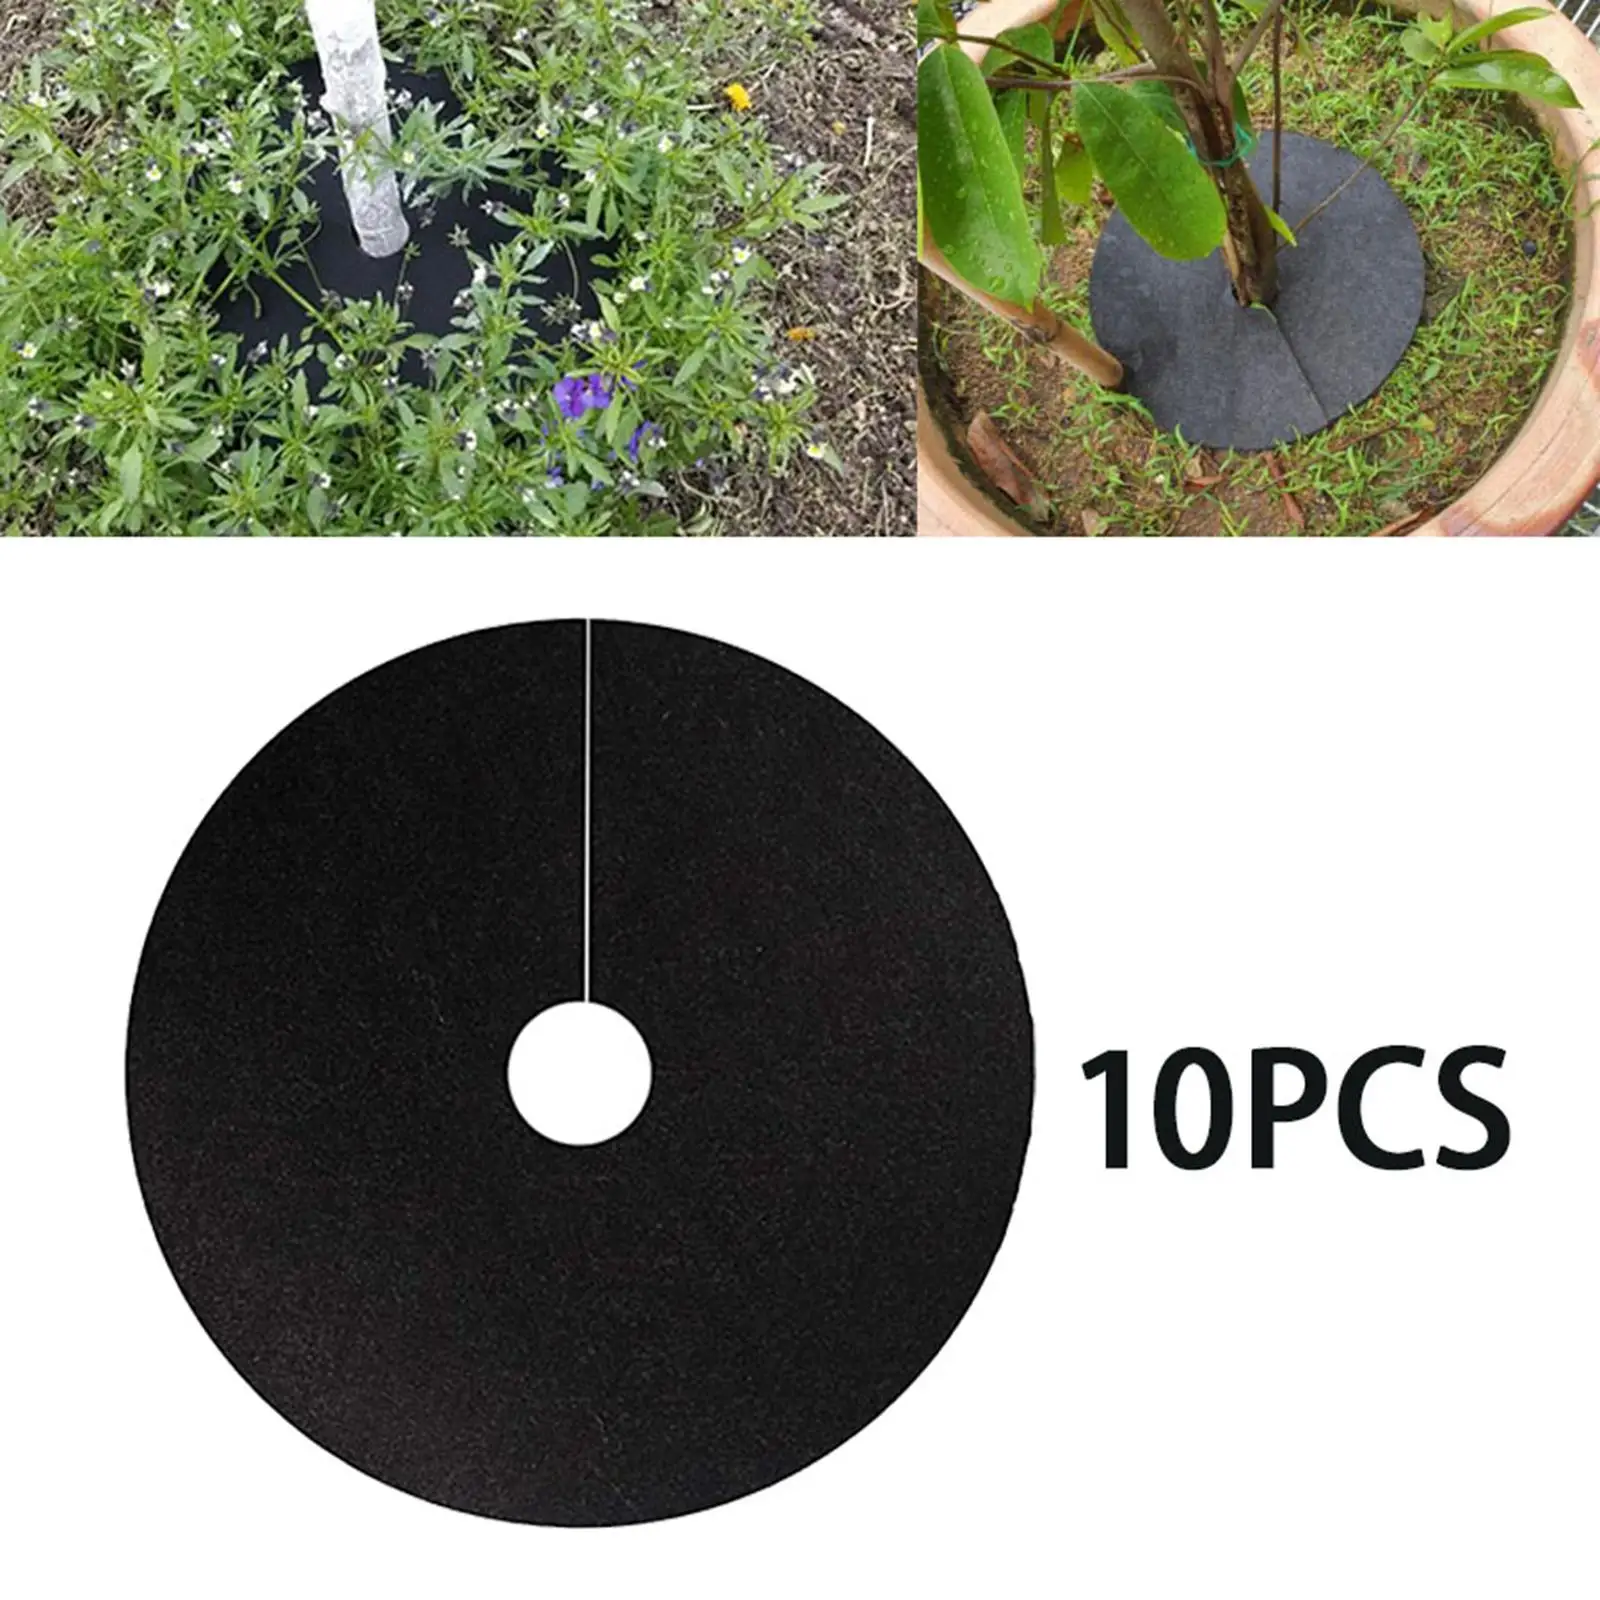 10 Count 52cm Mulch Tree Rings for Weed Control, Tree Protector Mat Easy to Use Degradable Durable Wide Application Landscaping